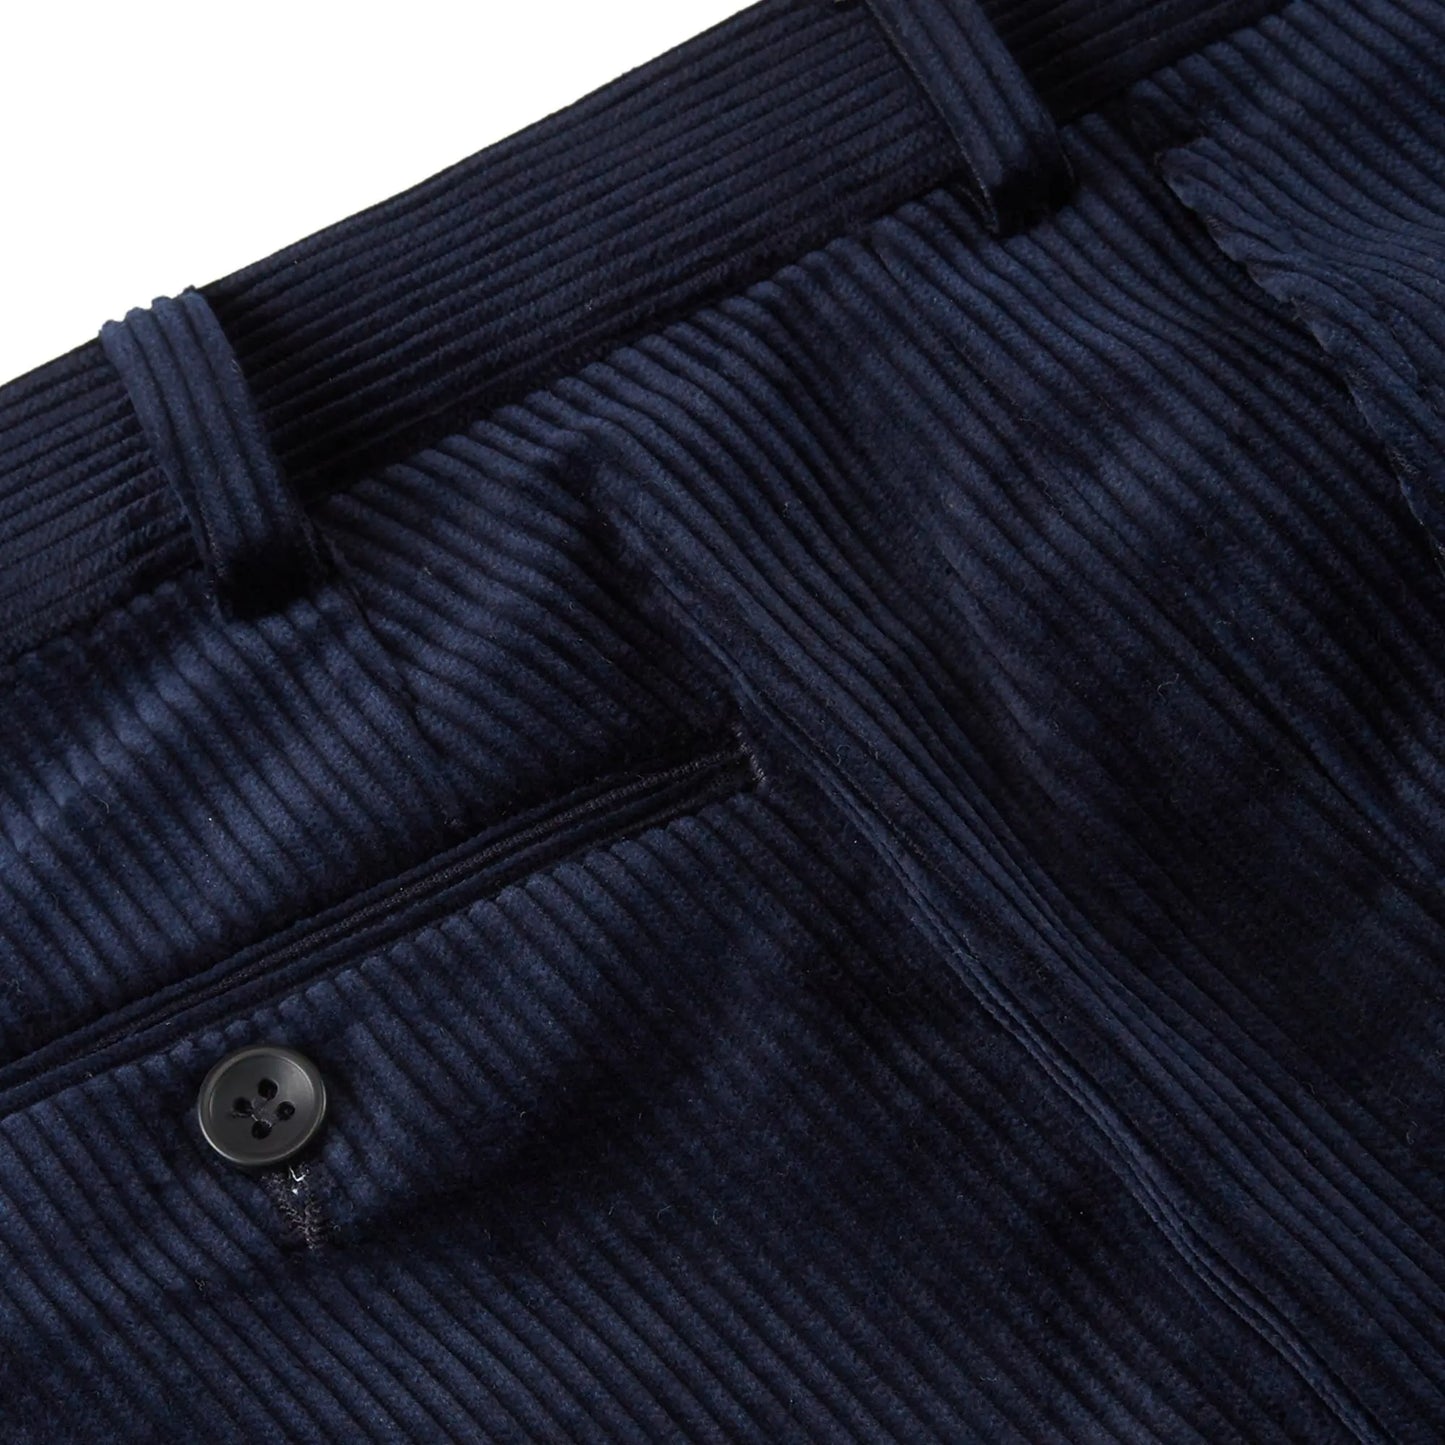 Buy Douglas & Grahame Corduroy Trouser - Navy | Separate Trouserss at Woven Durham